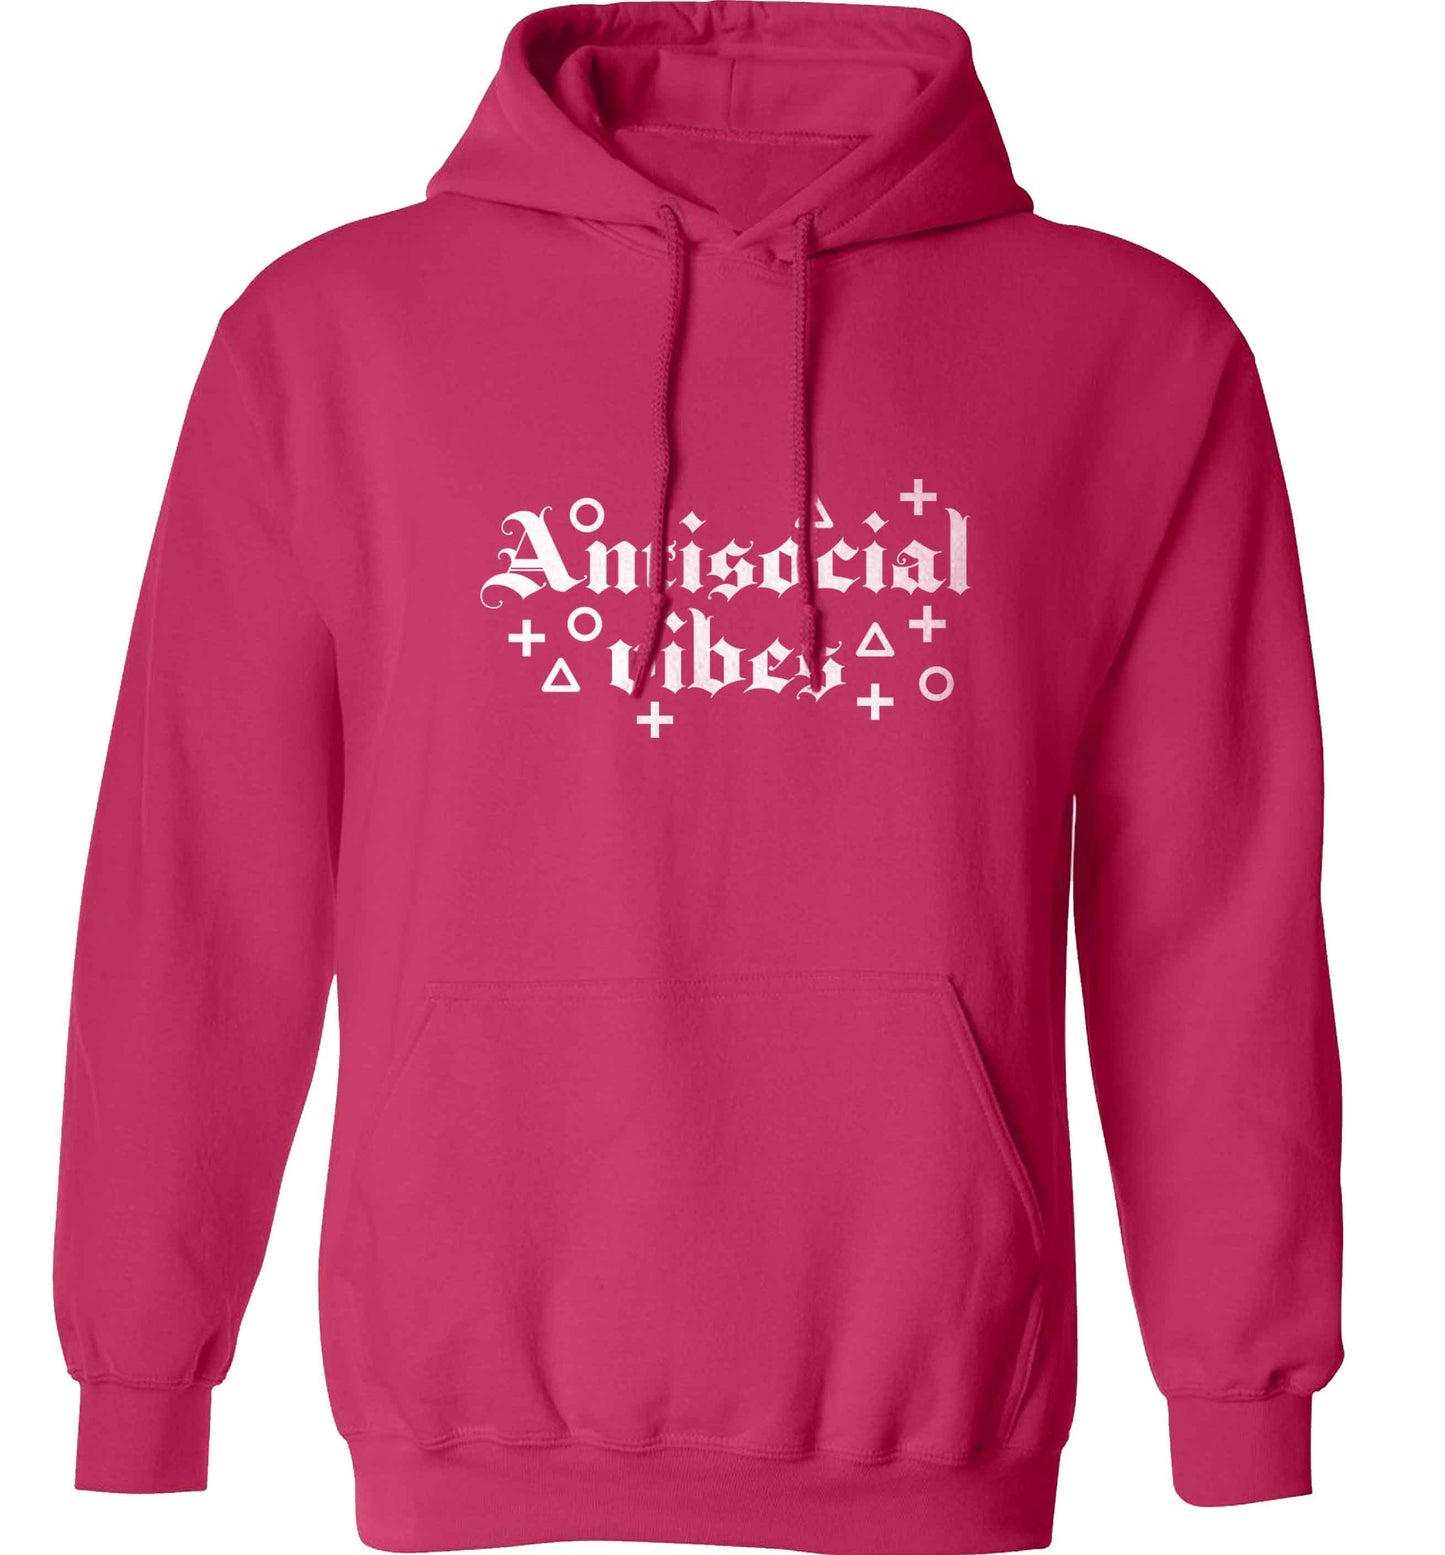 Antisocial vibes adults unisex pink hoodie 2XL